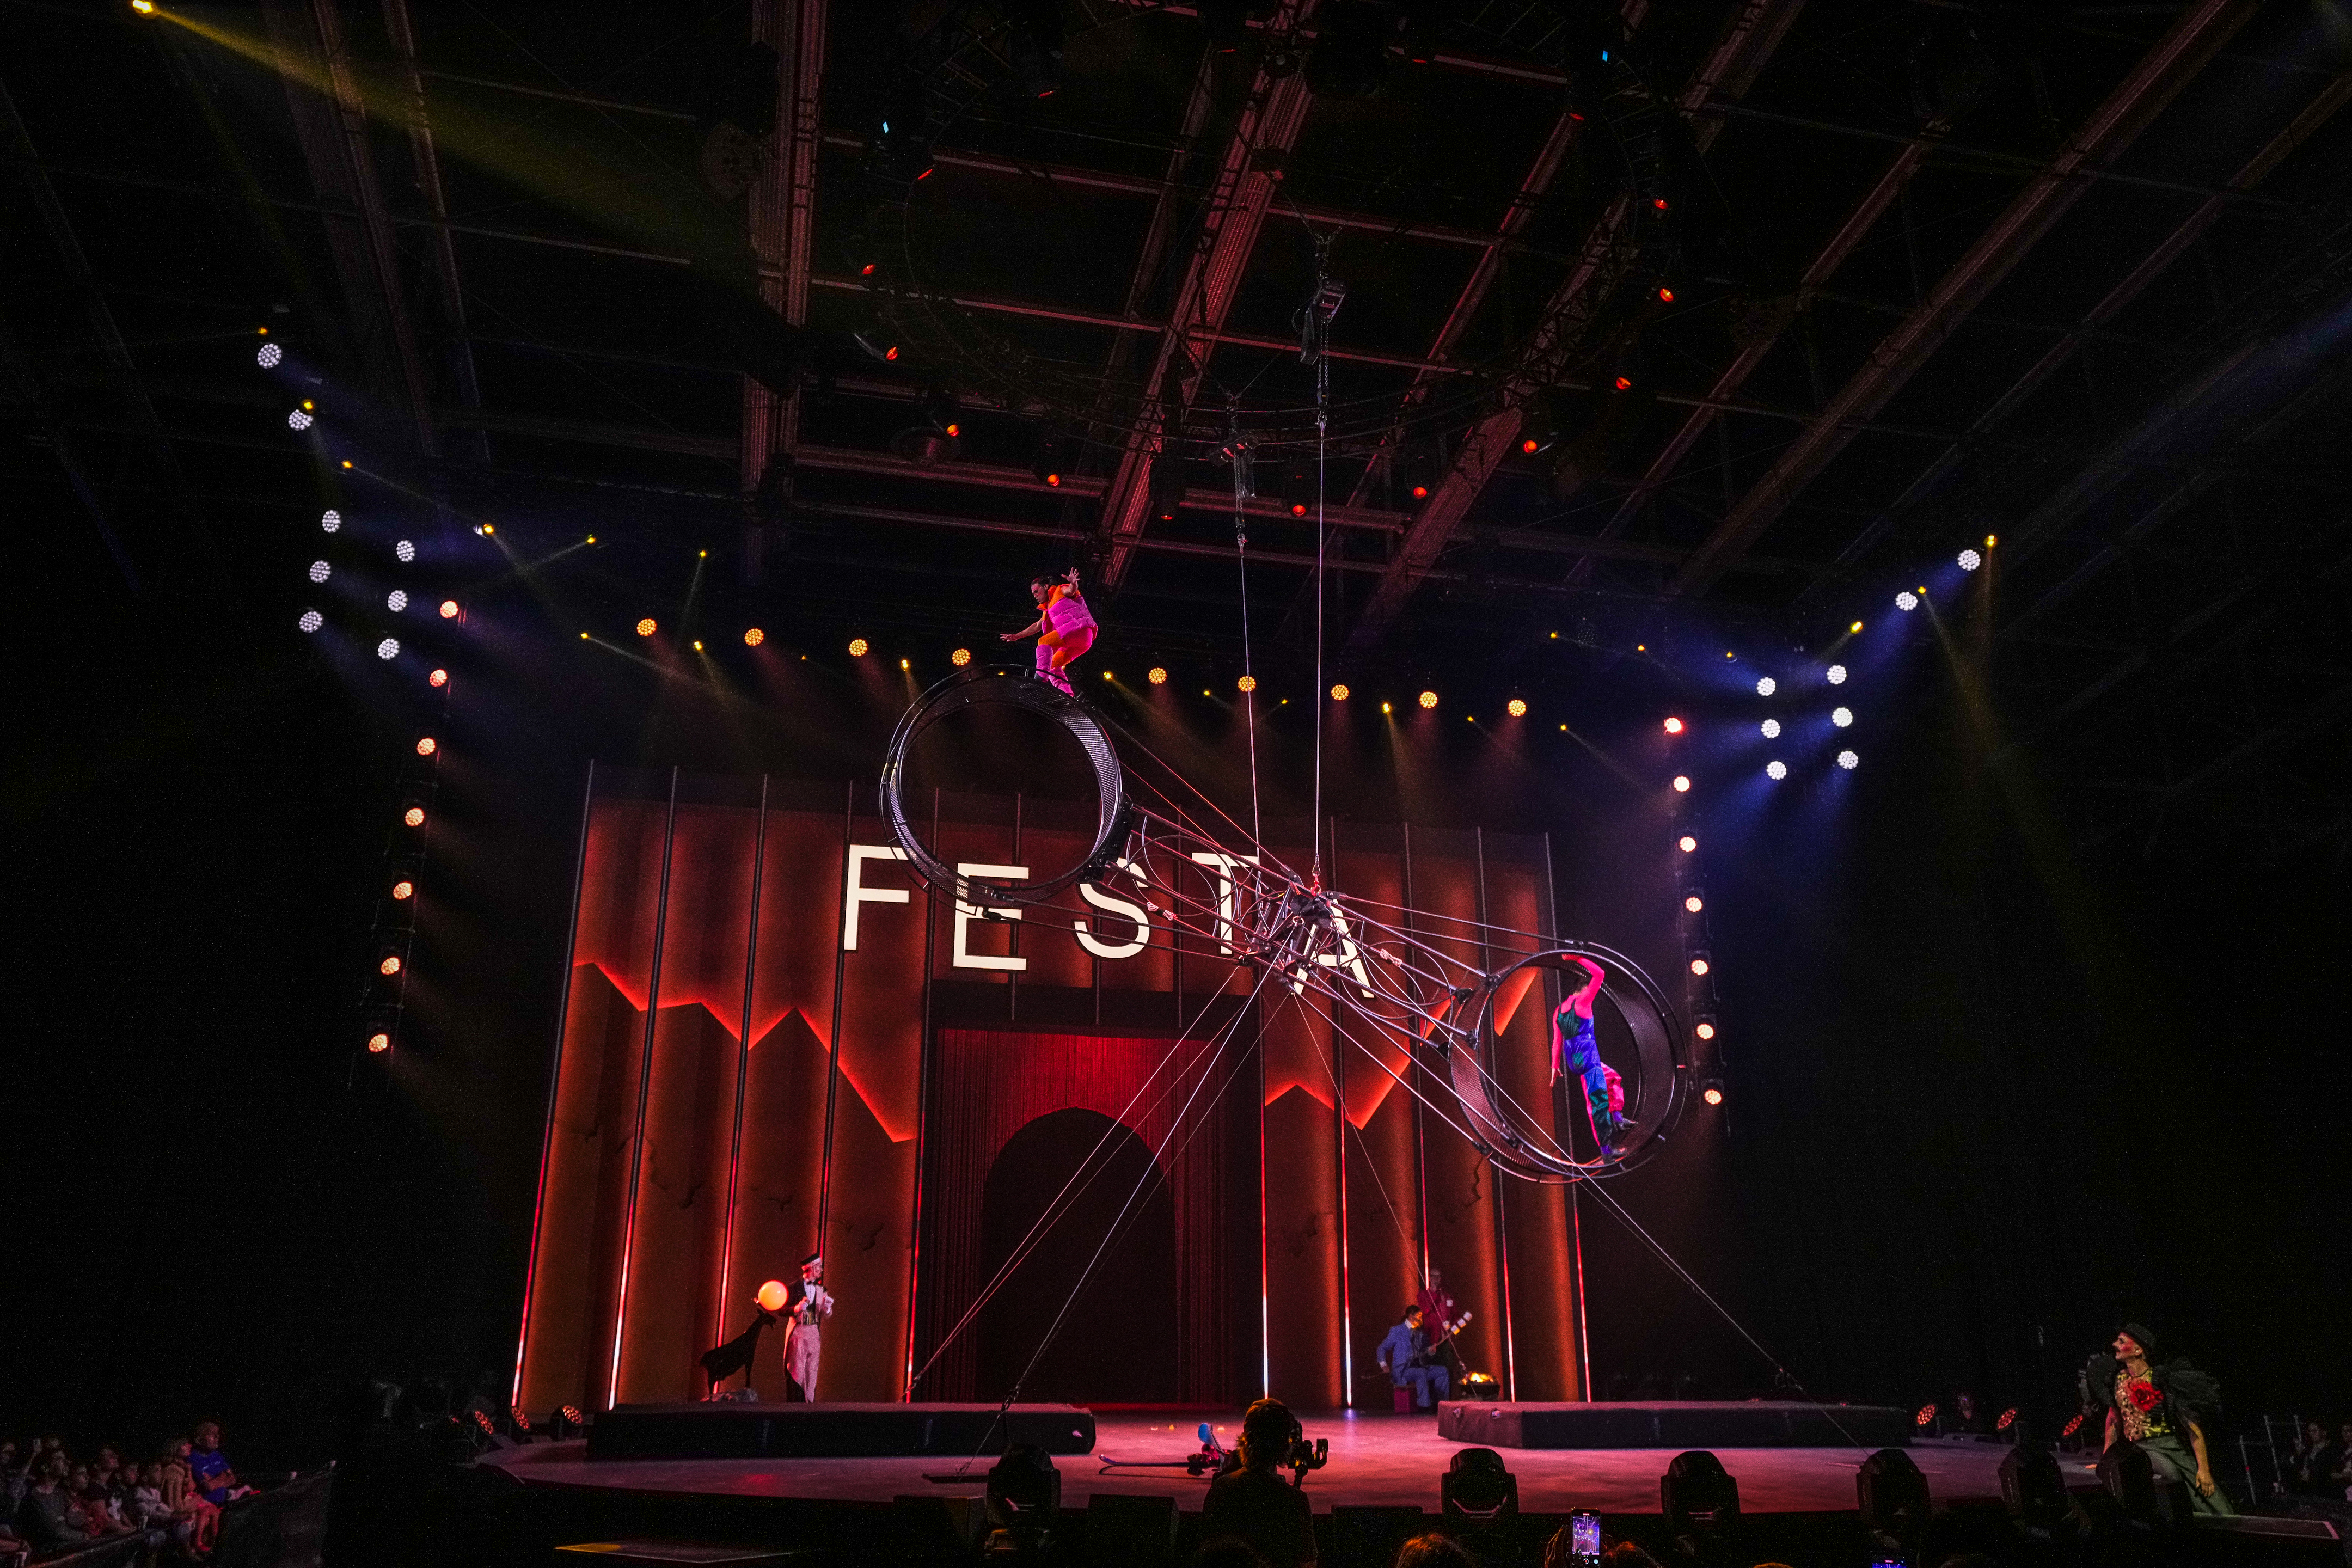 PRG is delighted to be working with Cirque du Soleil and their new show with Rigging, Audio and Lighting Technology.